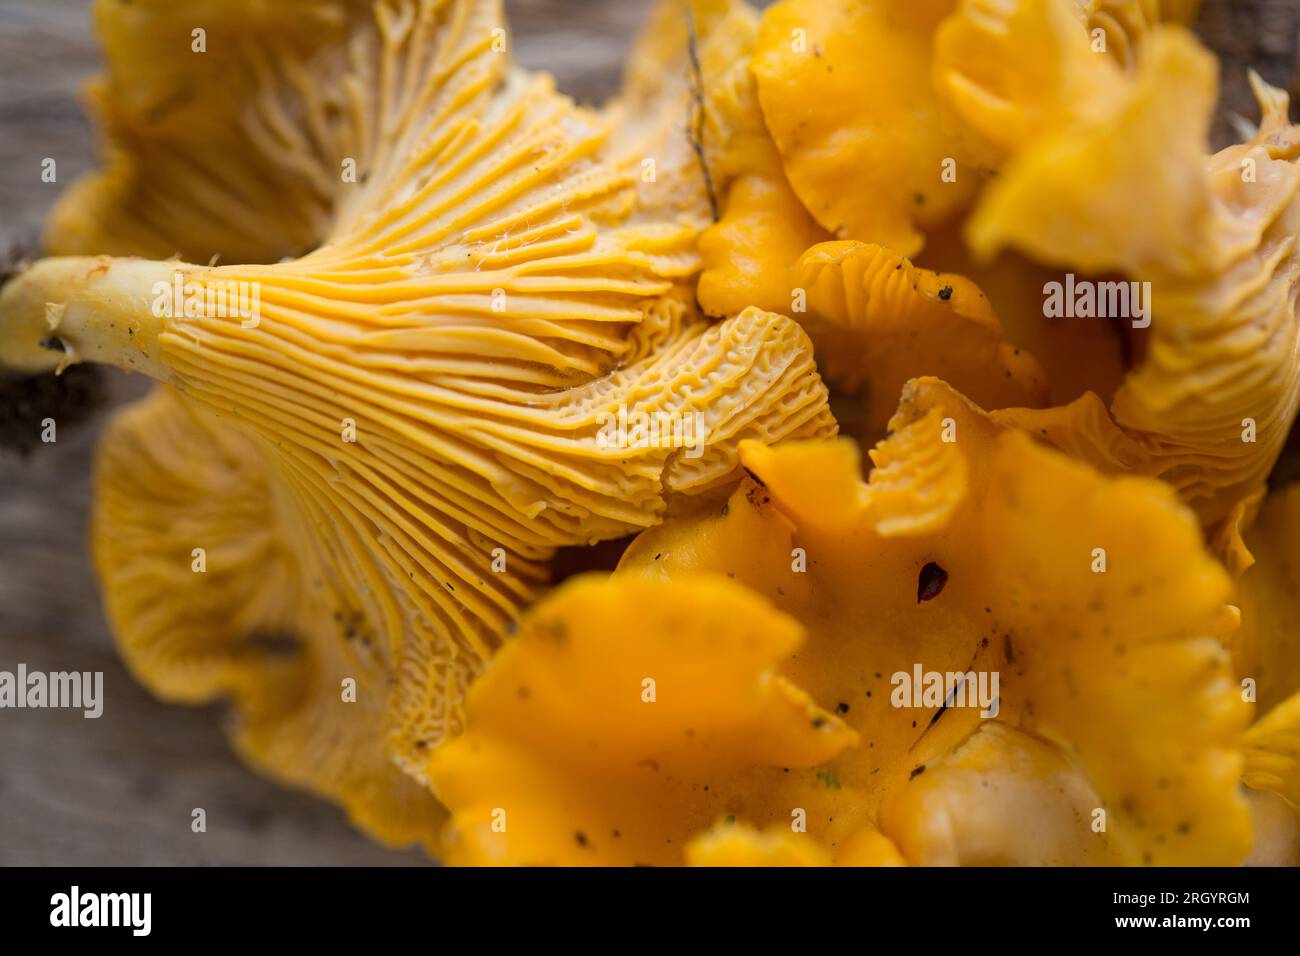 Chanterelles, Cantharellus cibarius, displayed on a wooden board. Mushroom foraging has become popular but great care must be taken to correctly ident Stock Photo